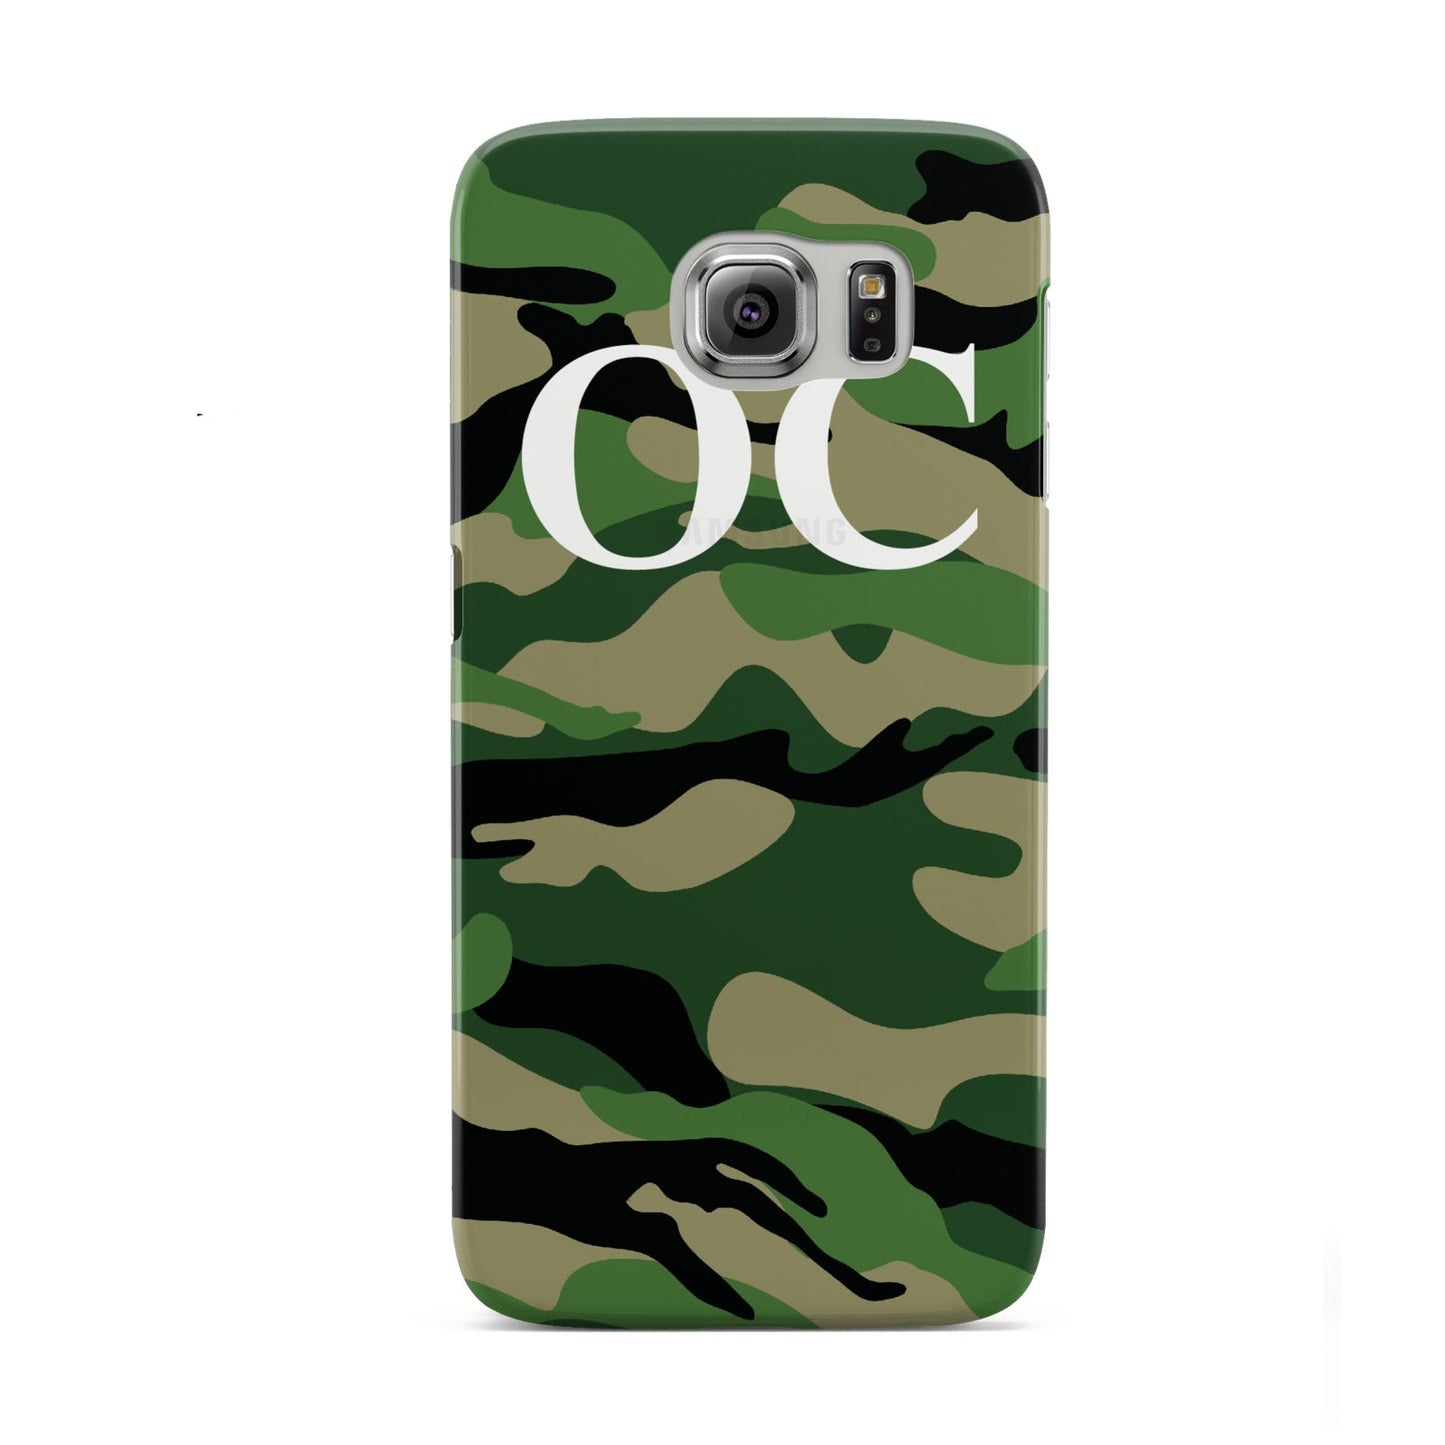 Personalised Camouflage Samsung Galaxy S6 Case